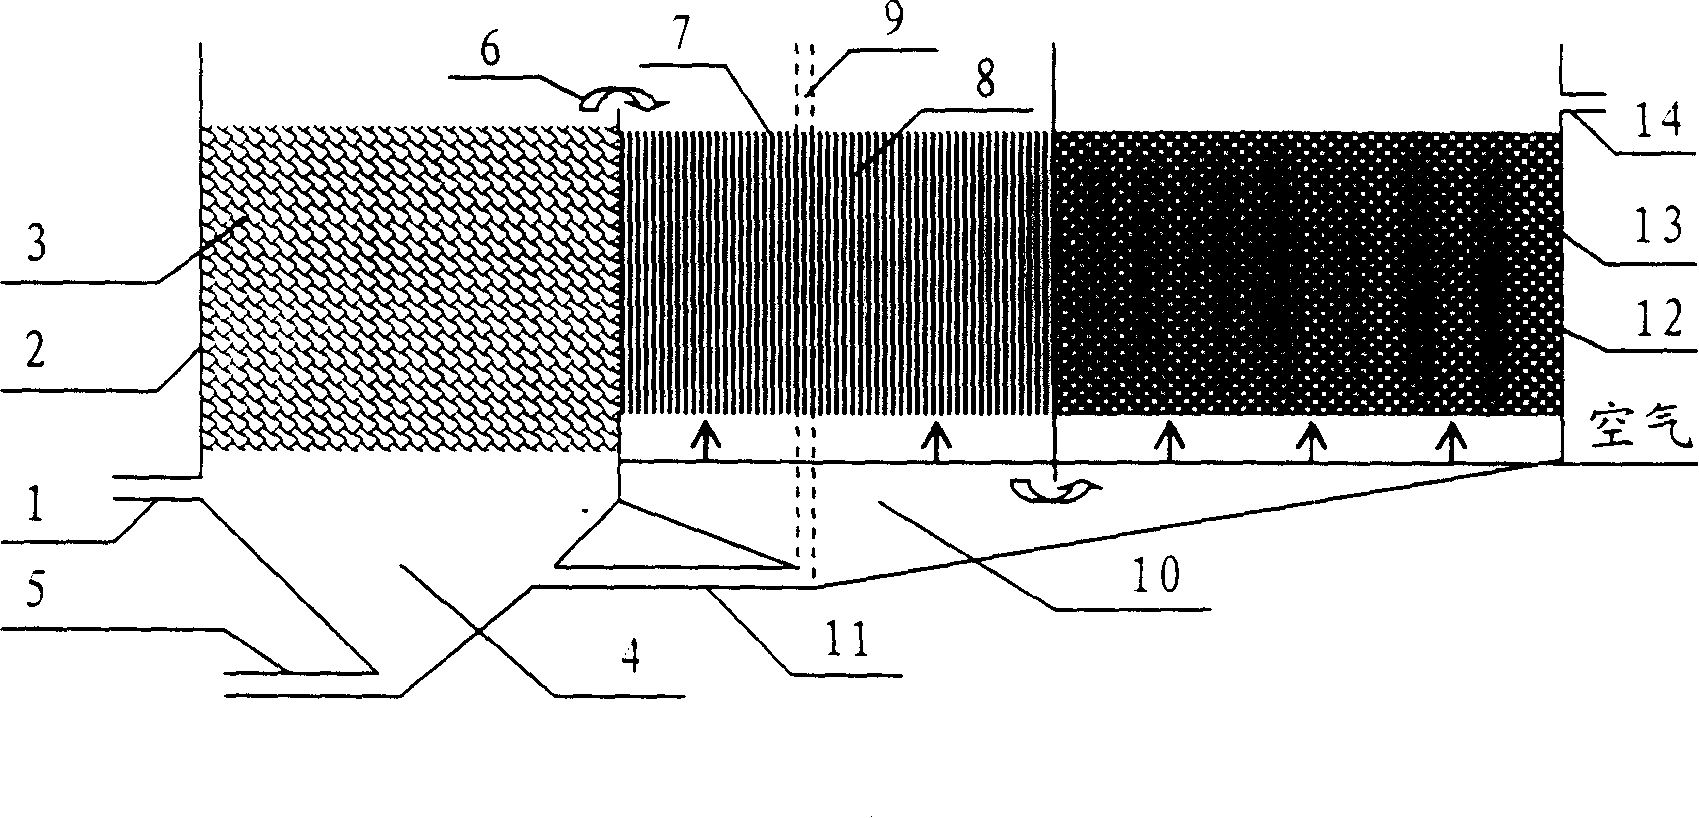 Water treatment method of circulating-water culture system